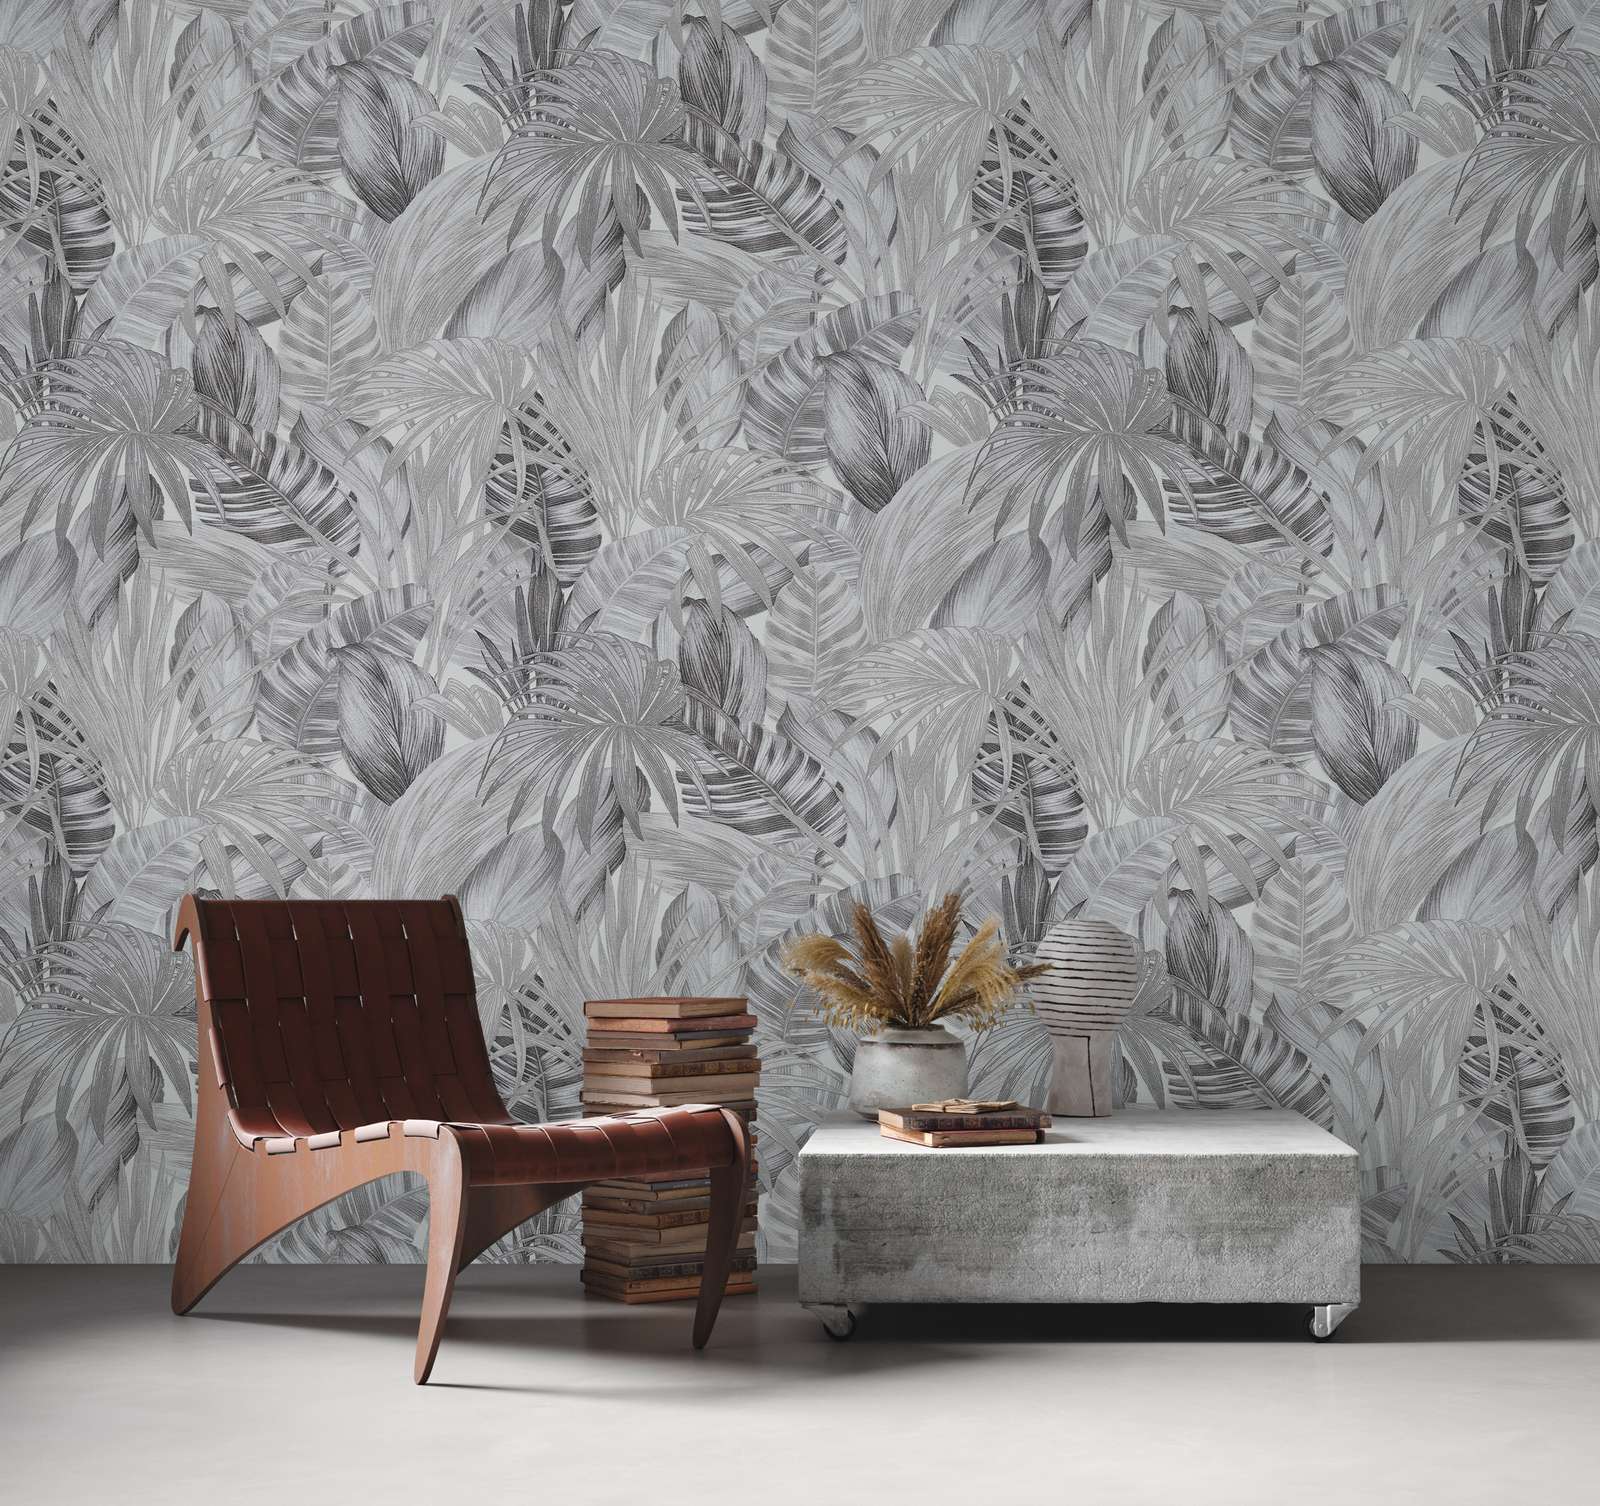             Pattern wallpaper with leaf motif in drawing style - black, white, grey
        